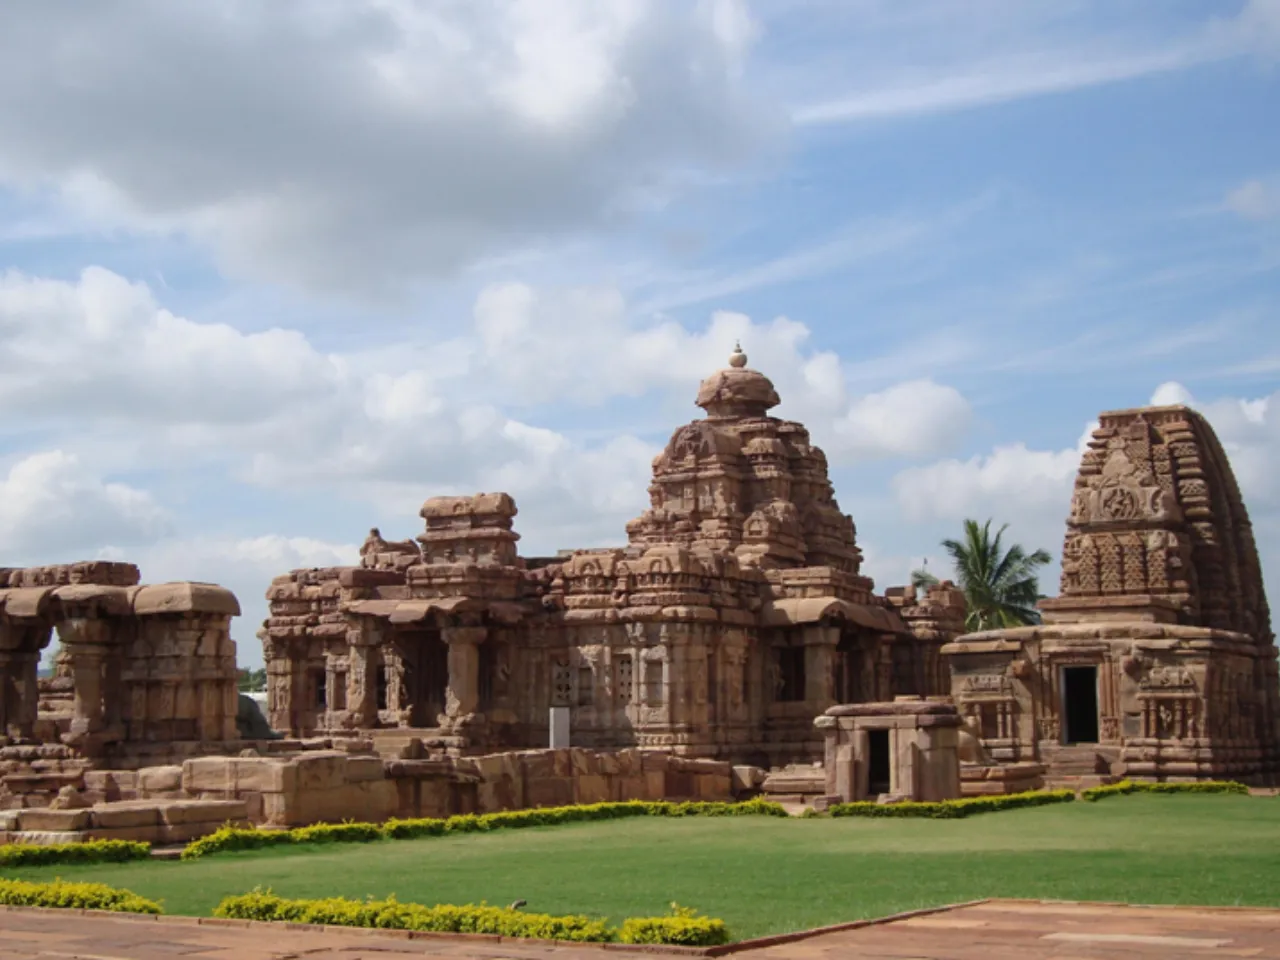 UNESCO World Heritage Sites: The Countless Structures of the Group of Monuments at Pattadakal